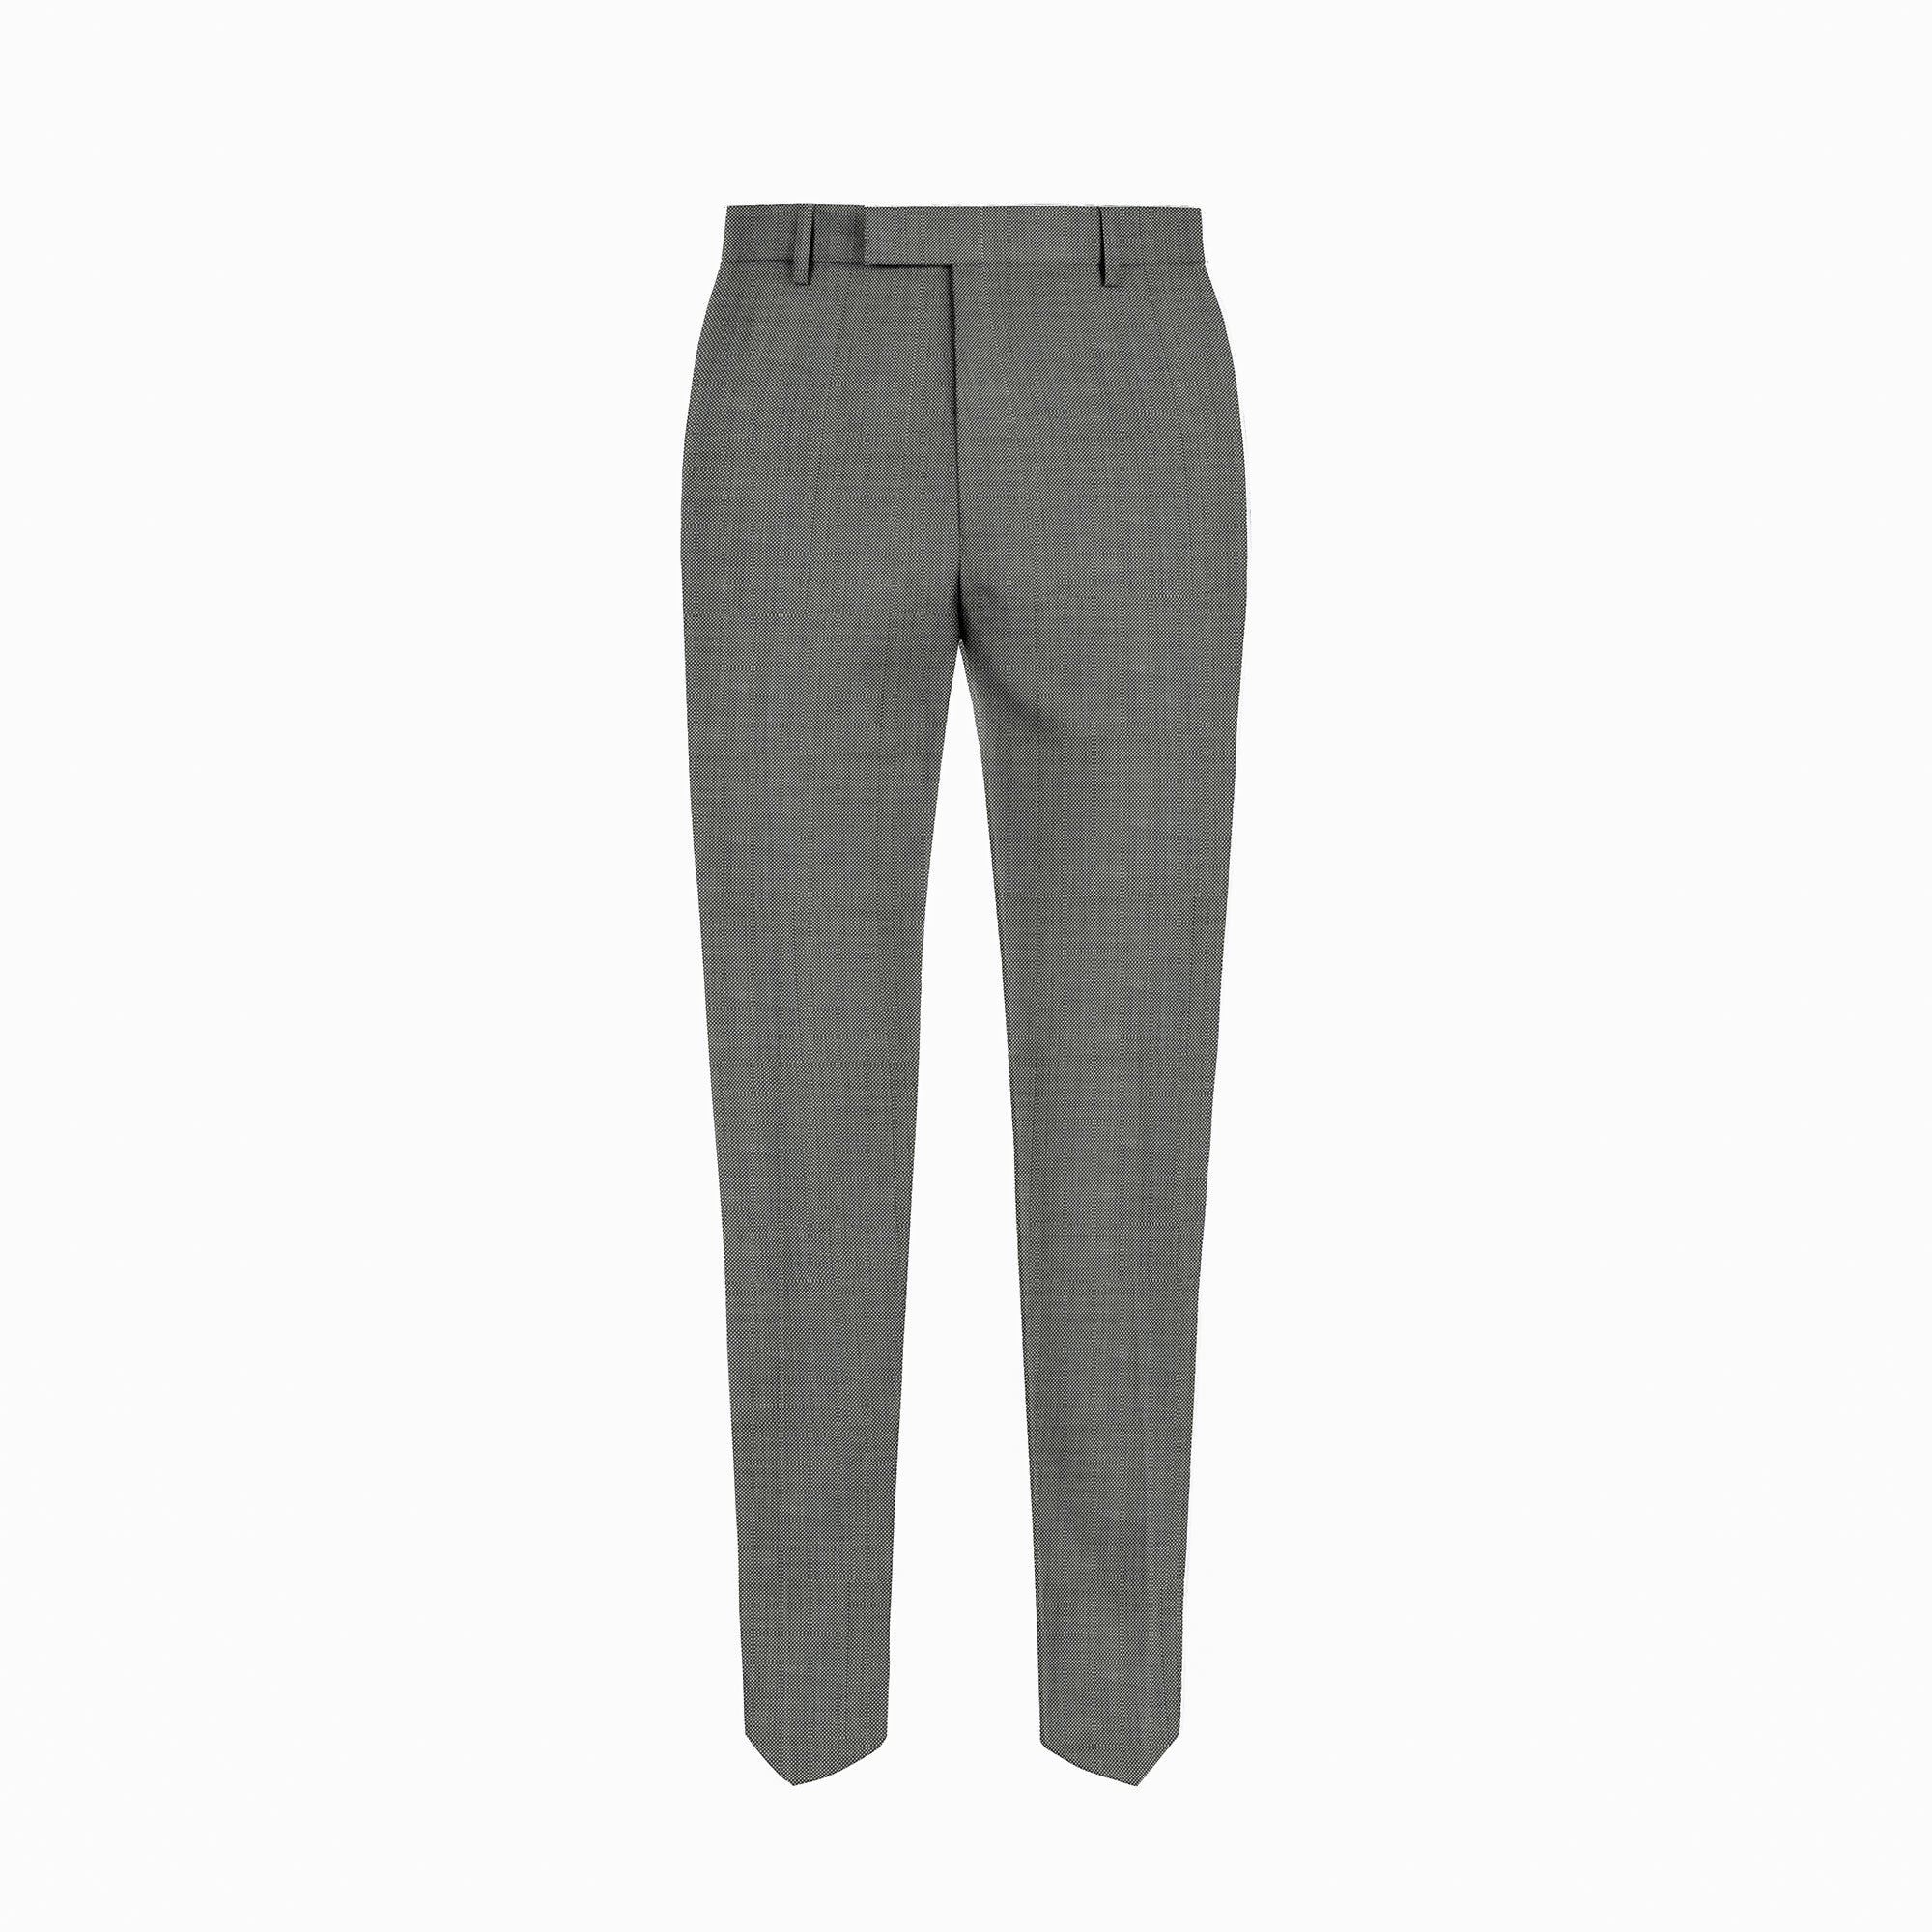 MALAGA FOSSIL GRAY WOOL BLENDED TROUSER